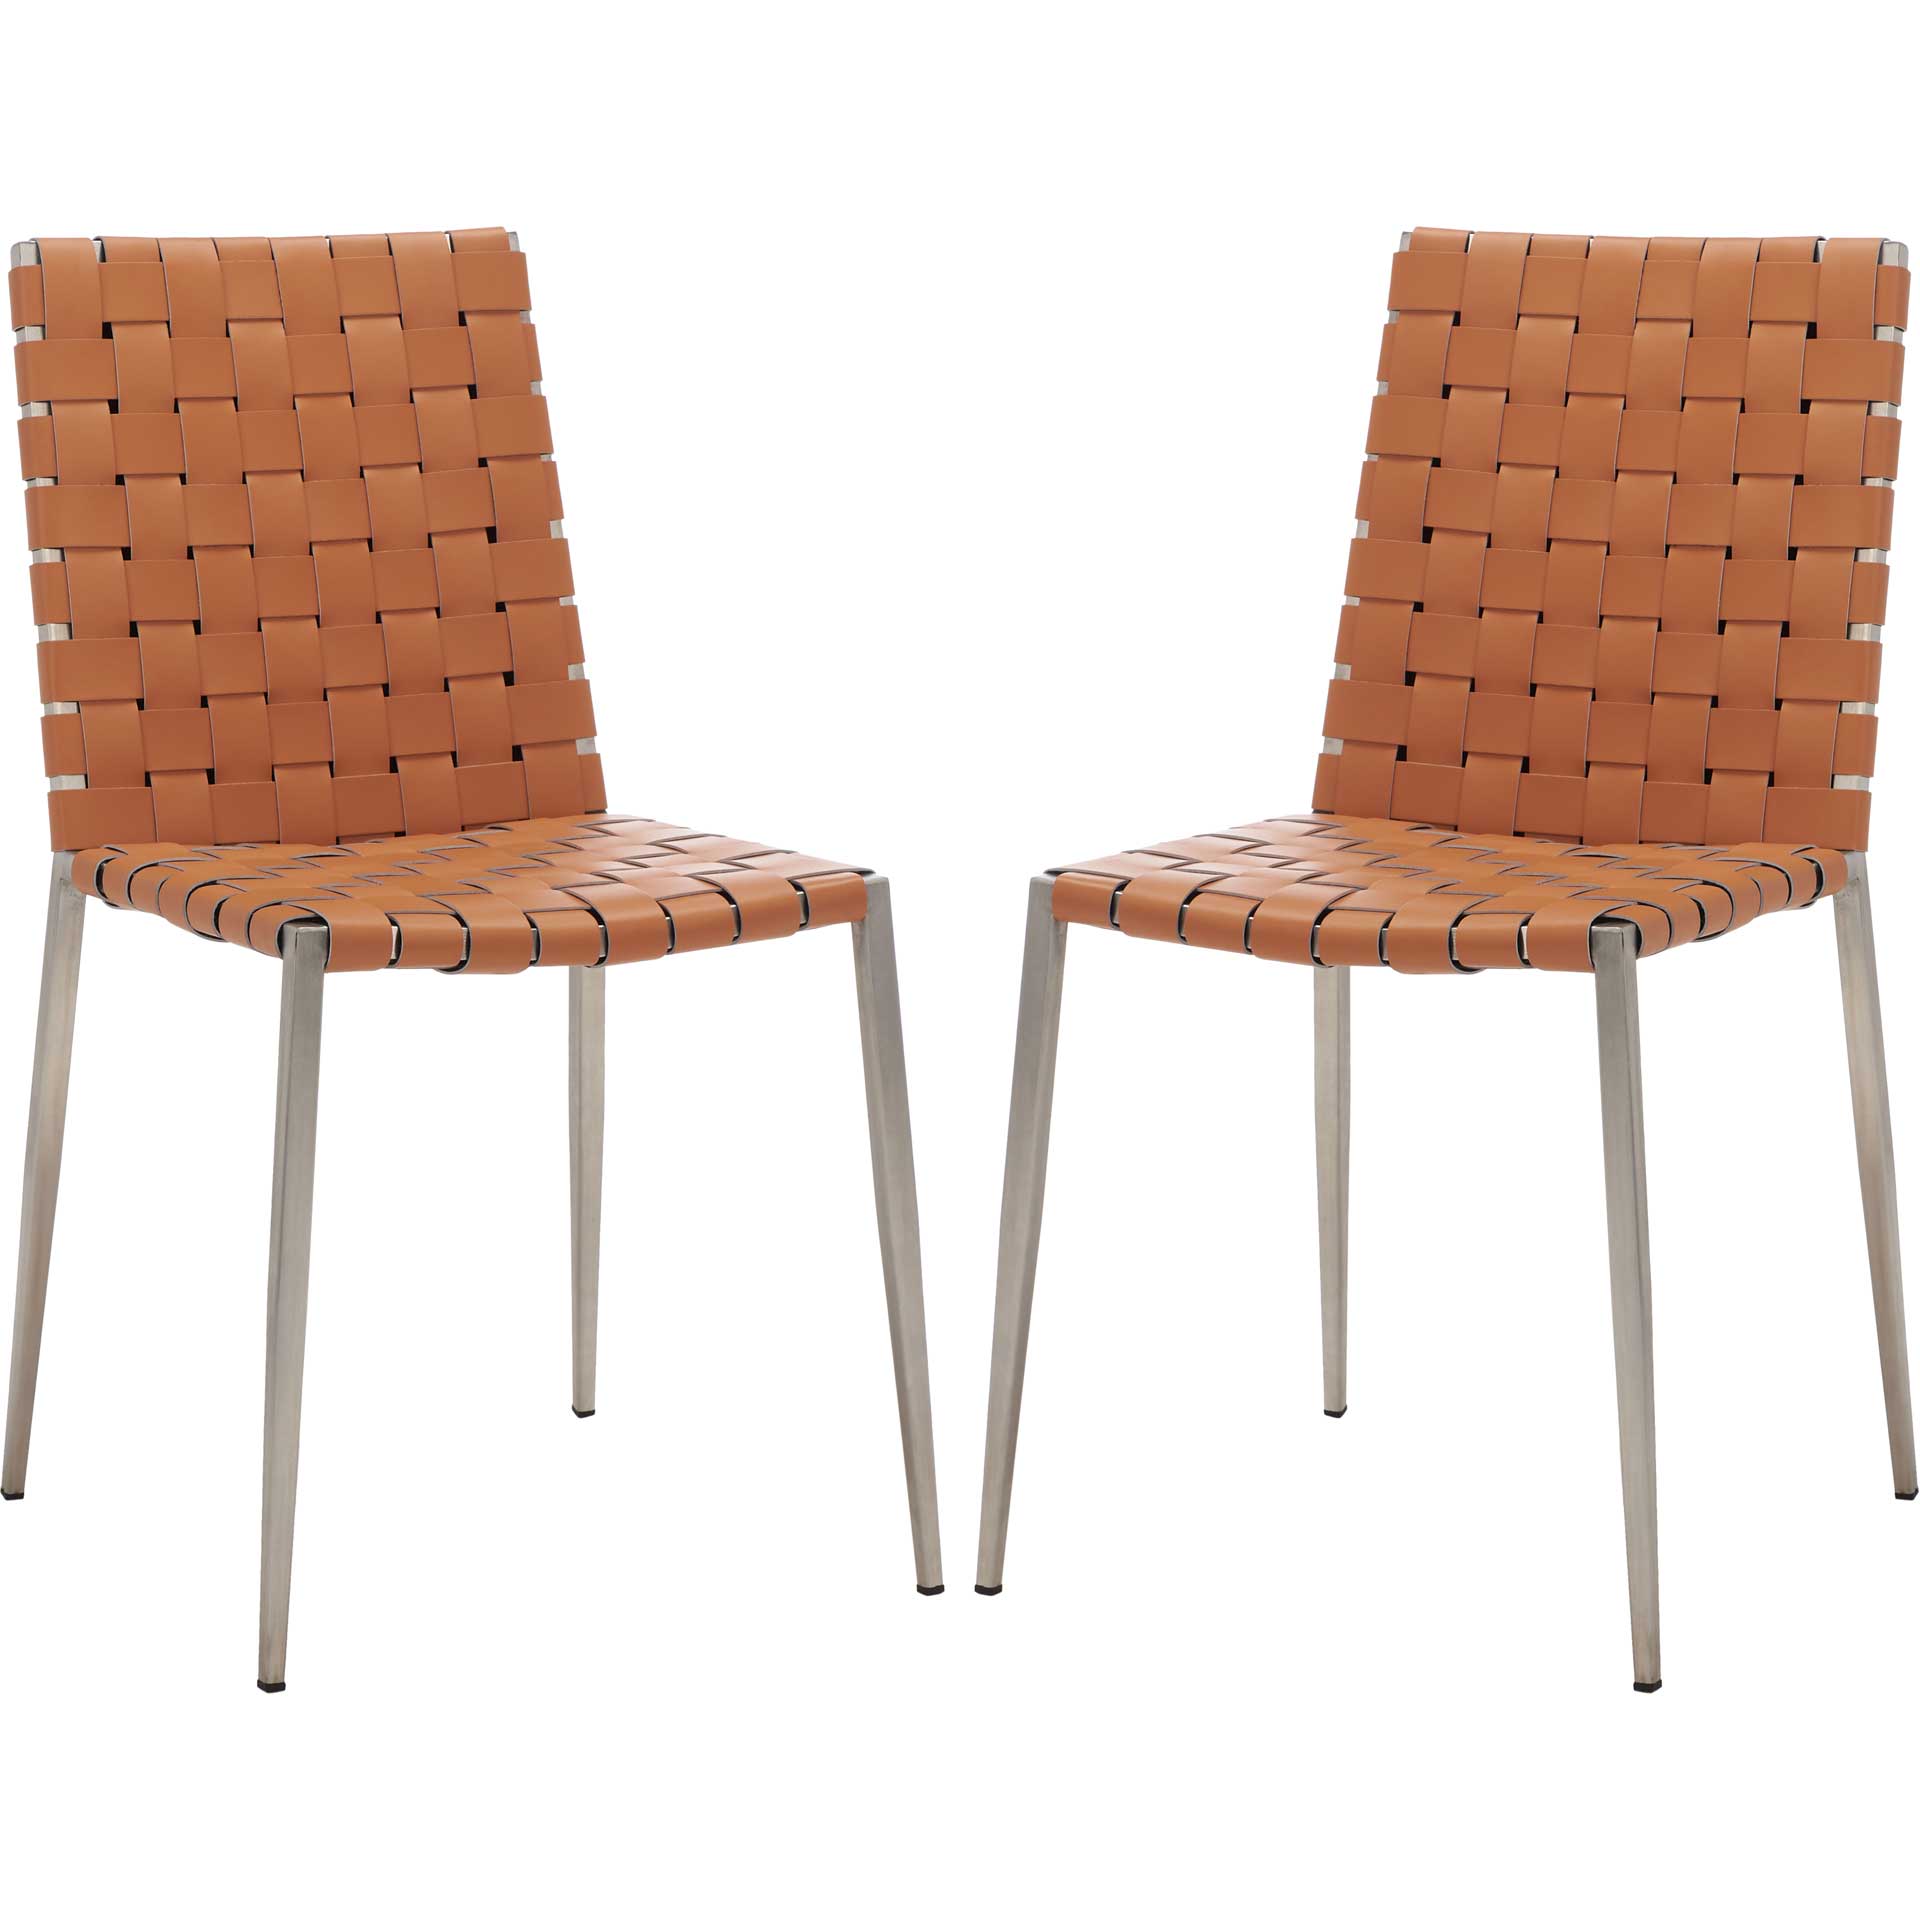 Ralen Woven Dining Chair Natural/Silver (Set of 2)